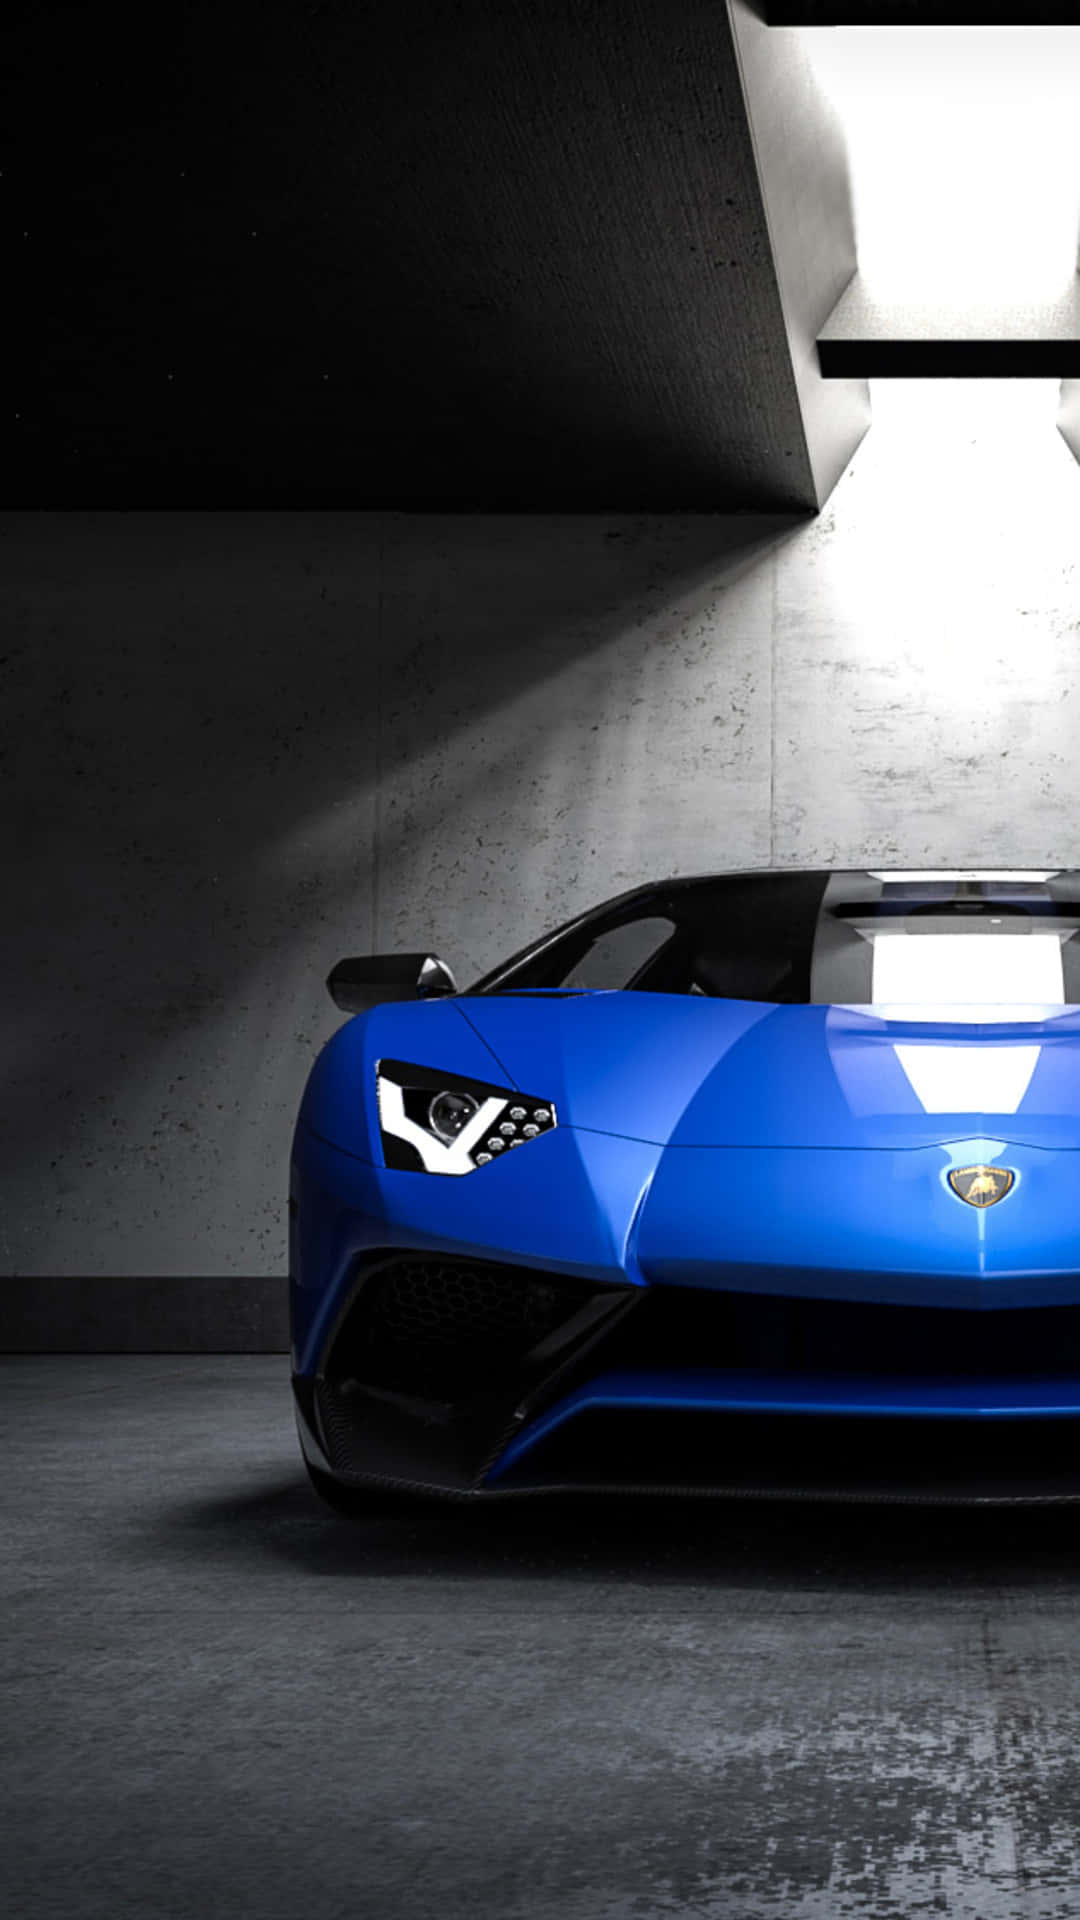 Luxury car enthusiasts can now drive their dream set of wheels with this Blue Lamborghini Iphone. Wallpaper